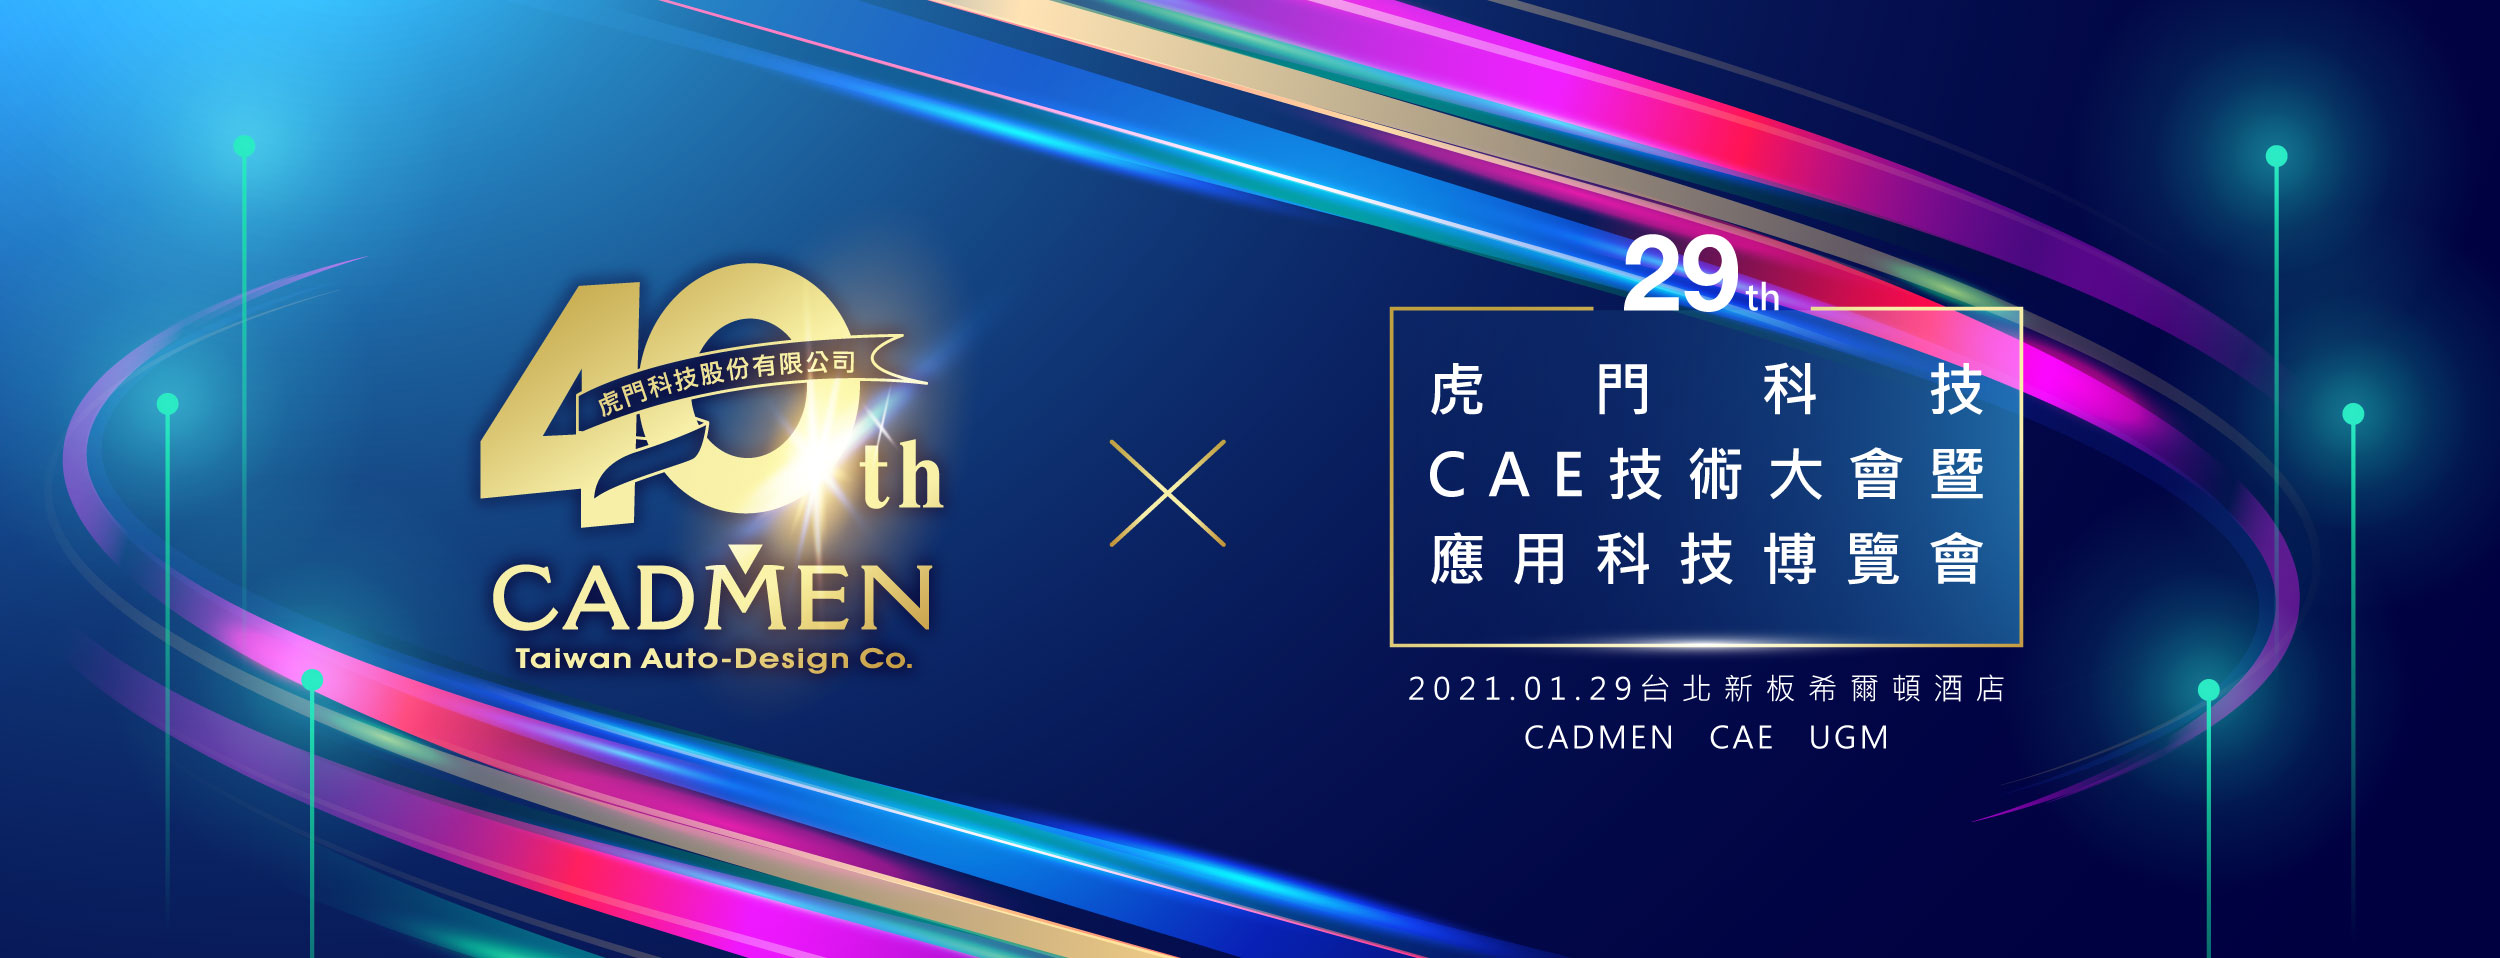 CADMEN Glory 40 - 29th CAE Technology Conference